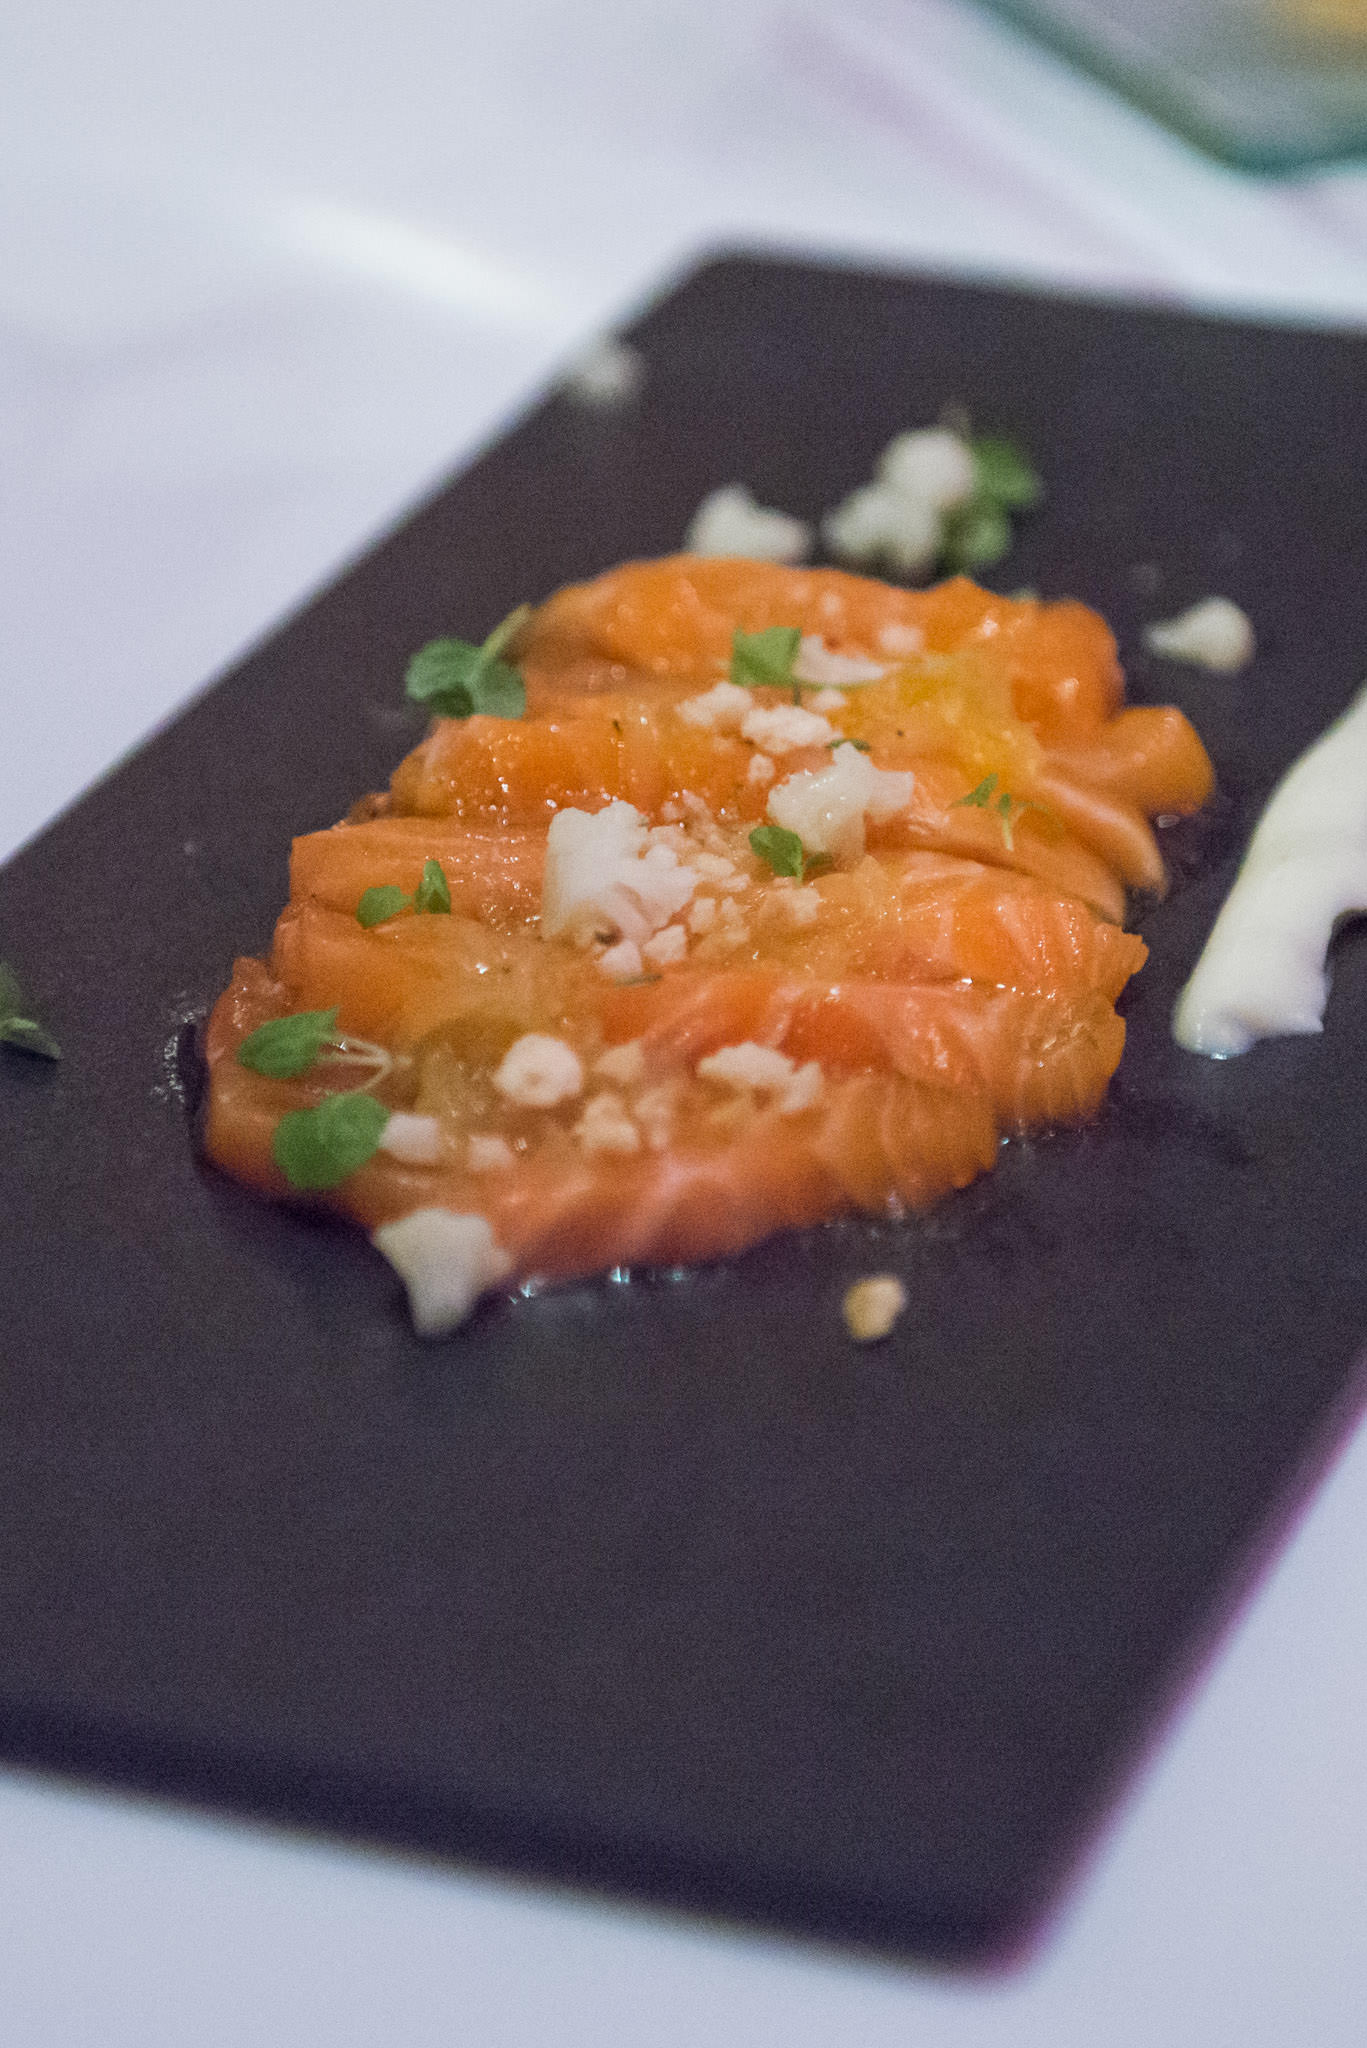 Cured Tasmanian salmon with cauliflower mousse and citrus dressing